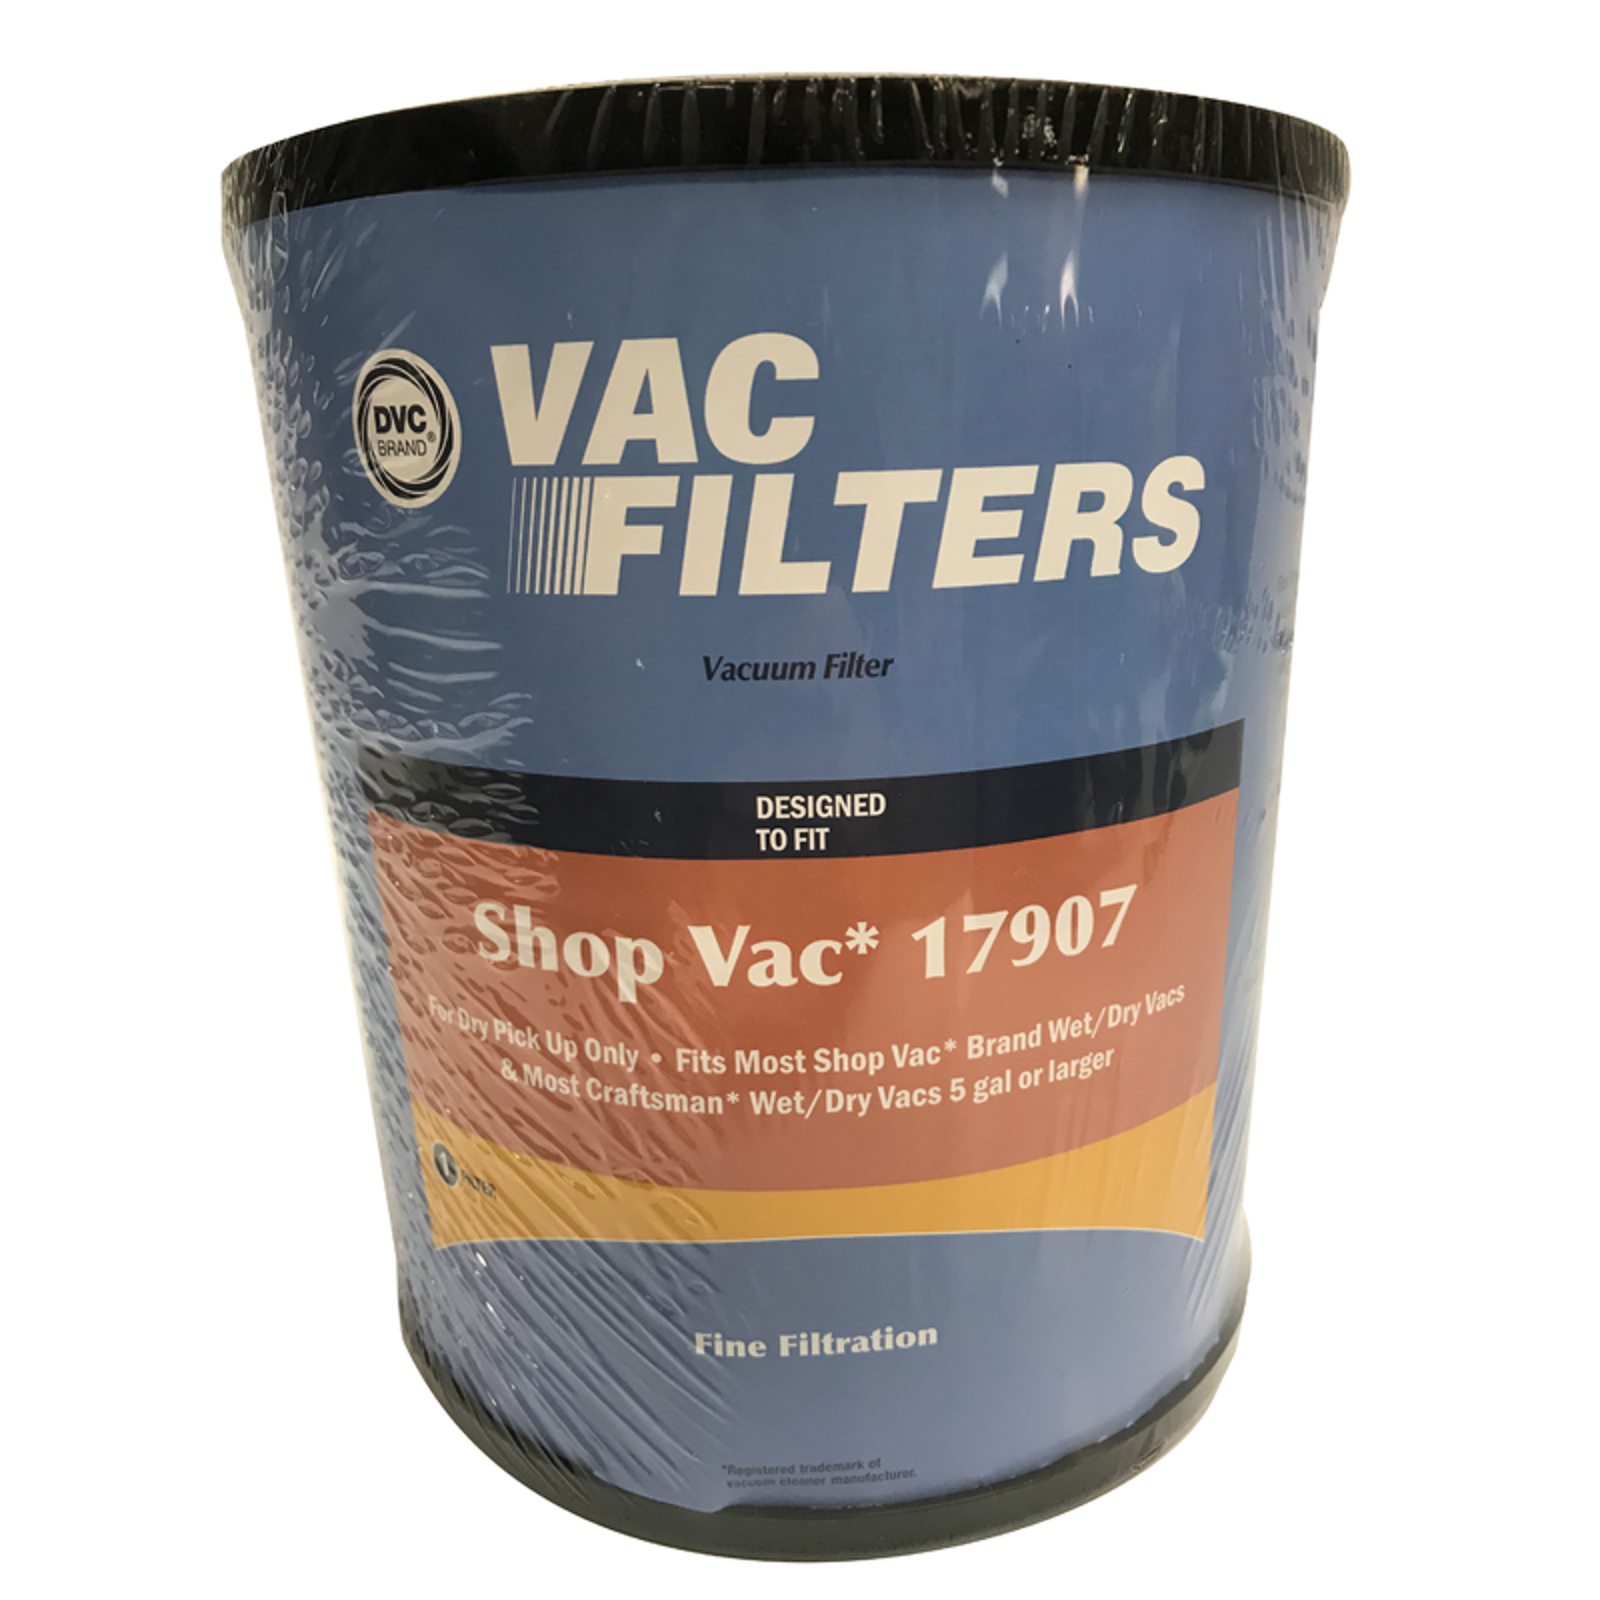 DVC Vacuum Filter Designed To Fit Shop Vac and Craftsman 17907 Wet Dry Vacuums